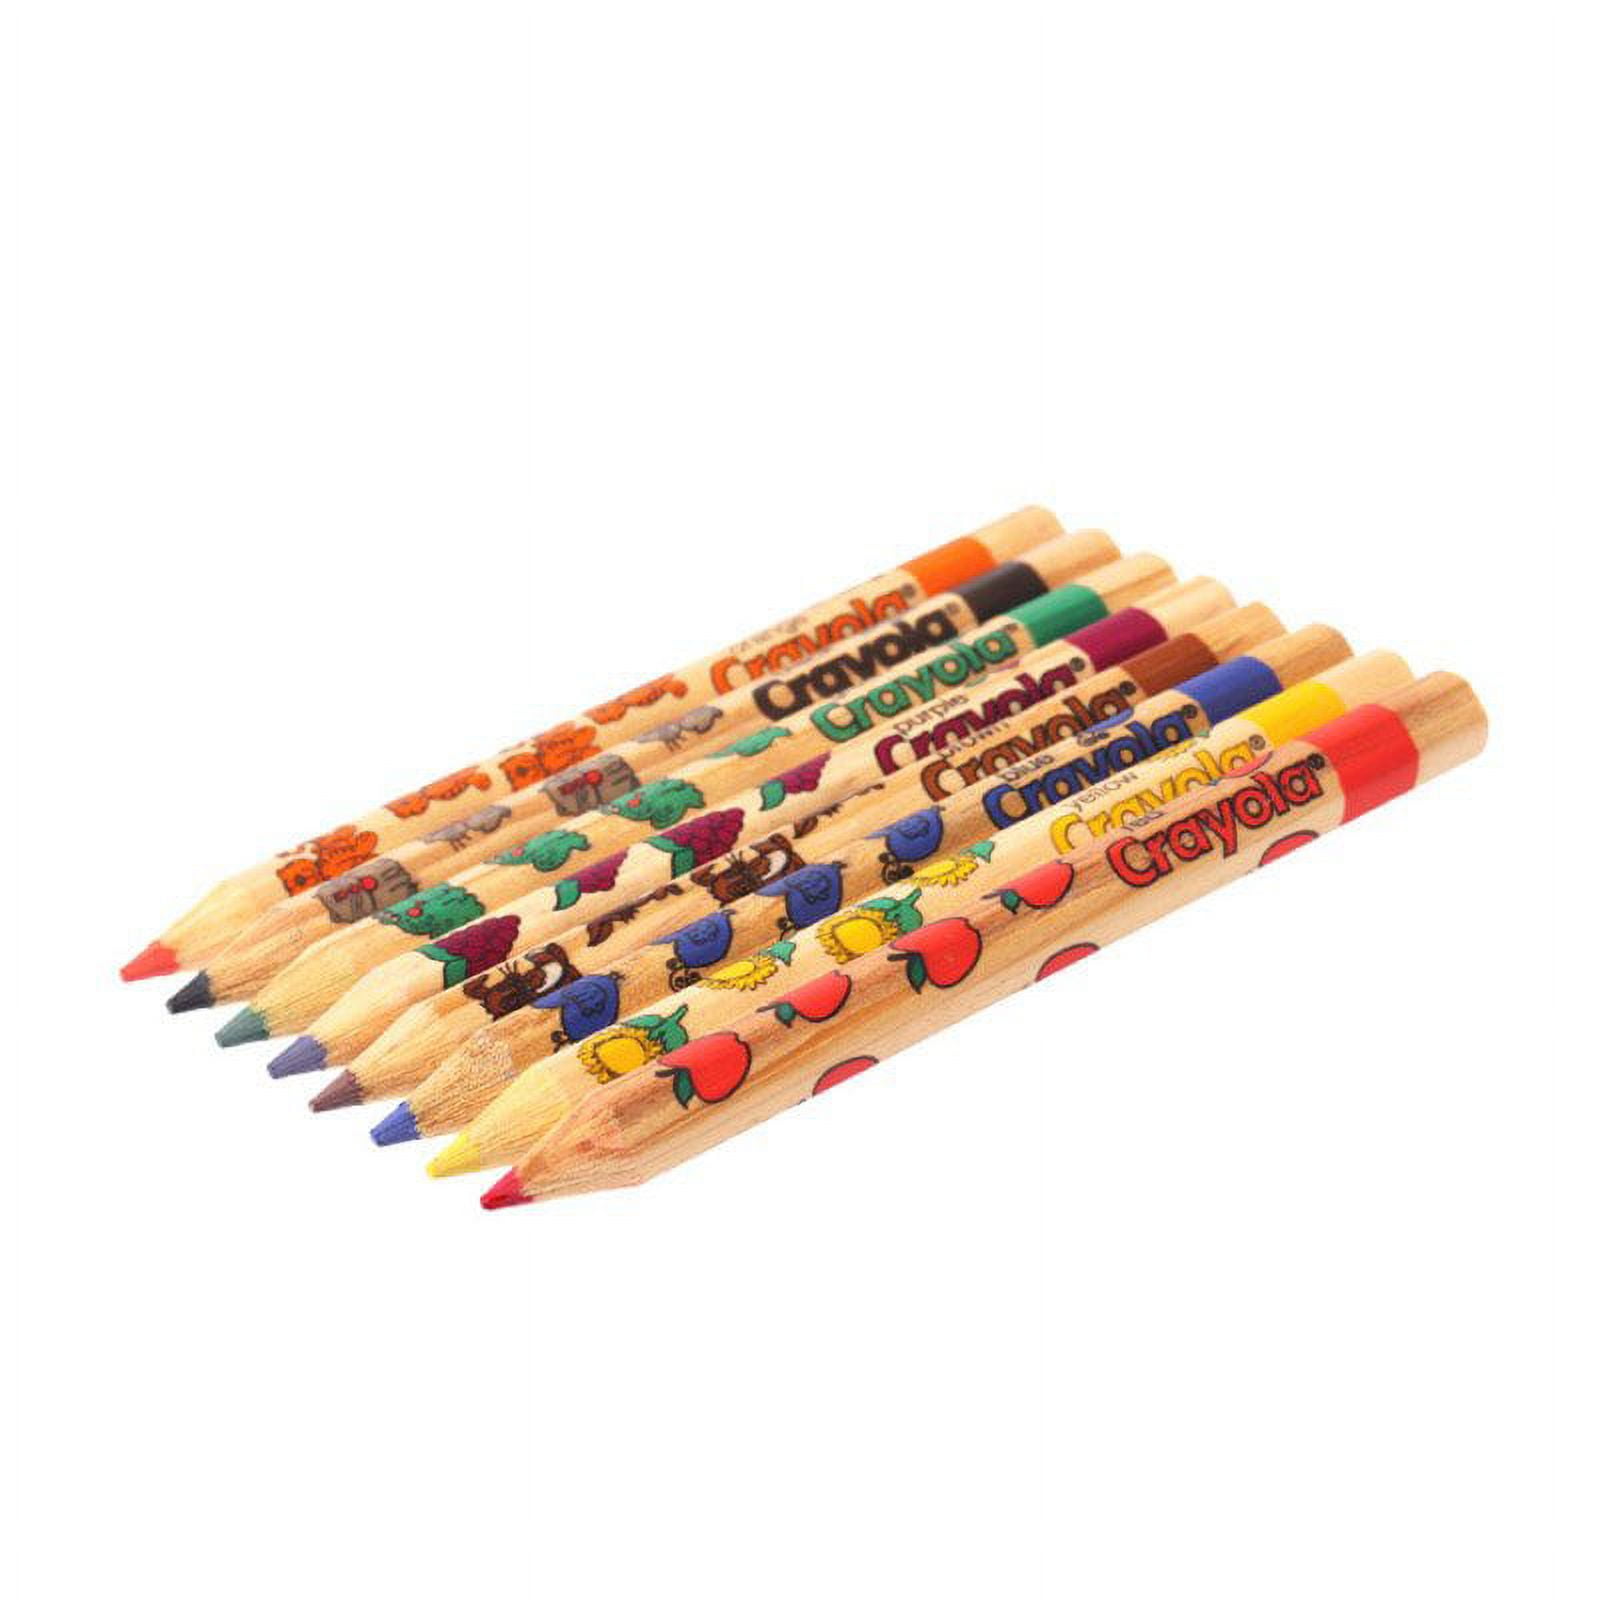 Crayola® 8-Pack Eco-Friendly Write Start Colored Pencils